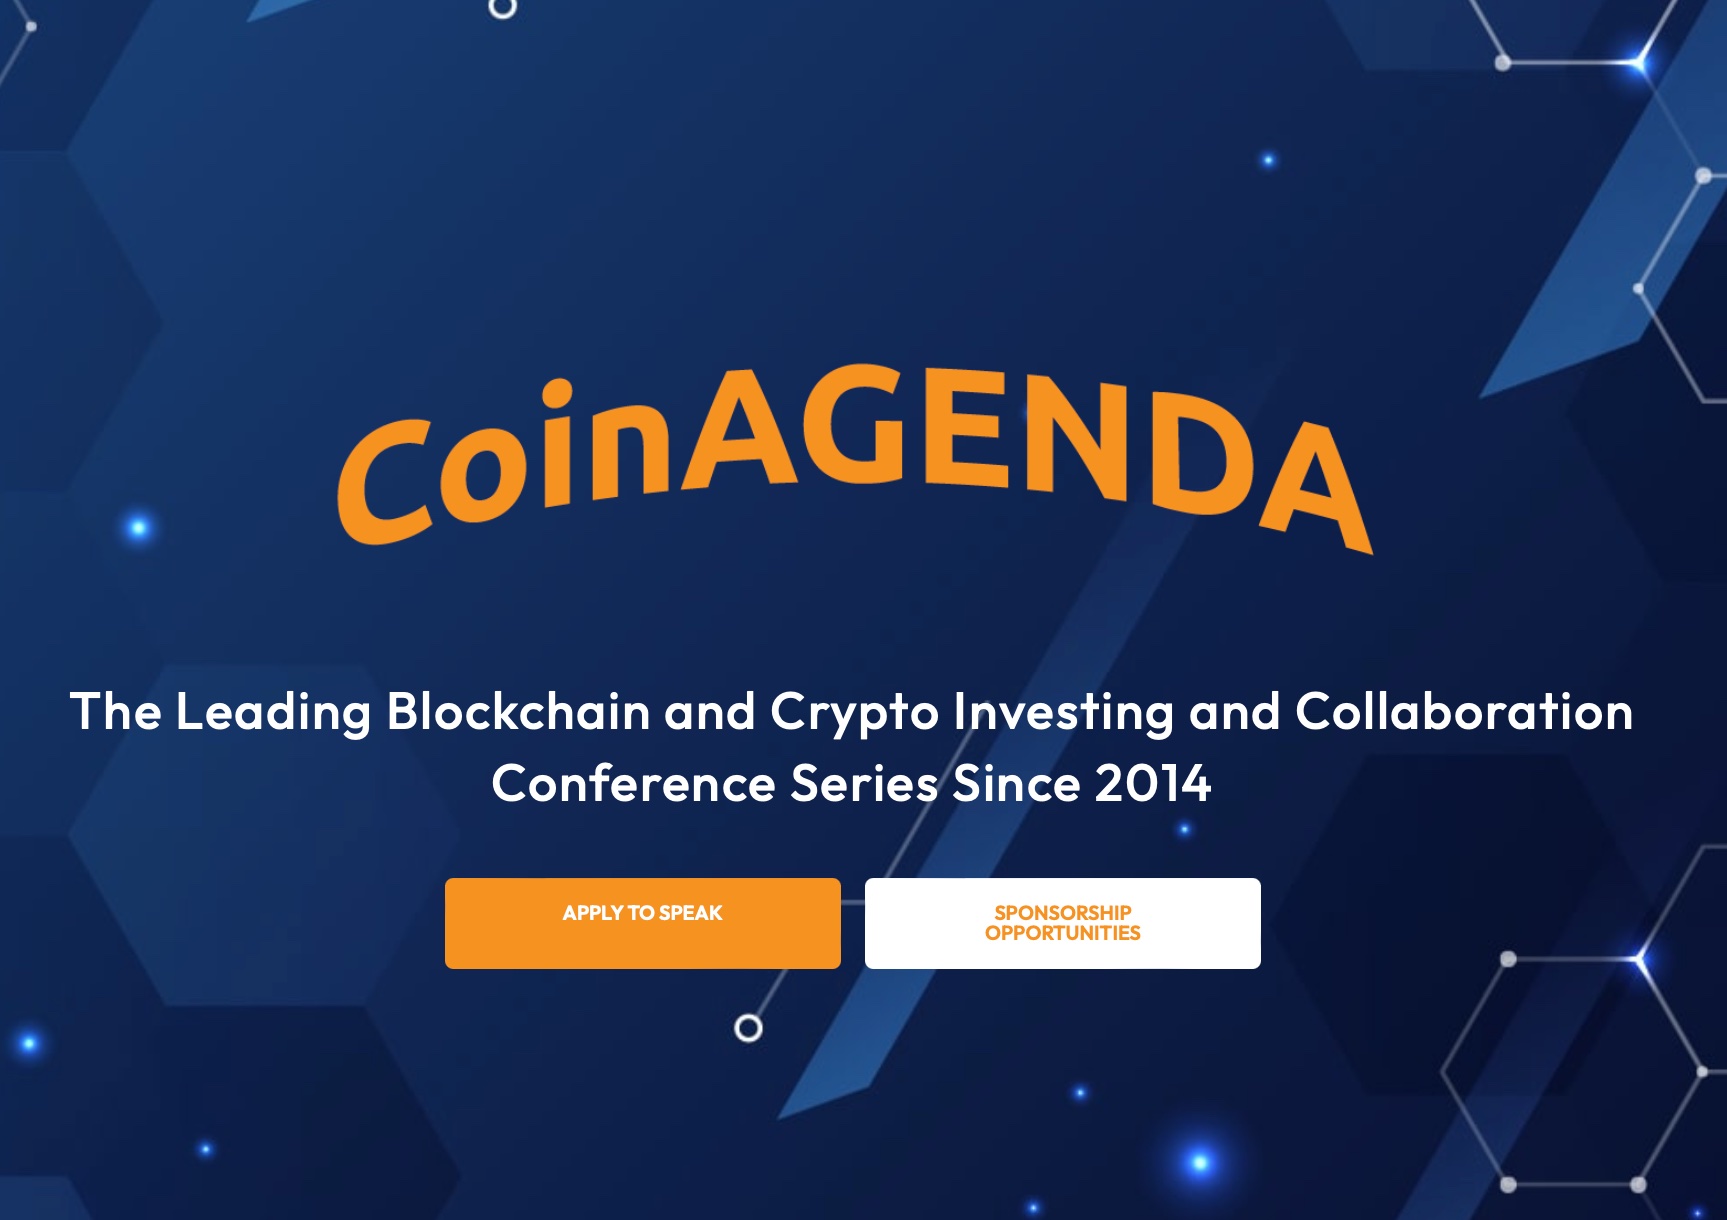 Image: CoinAgenda - The Top Blockchain, Crypto, and Web3 Conference